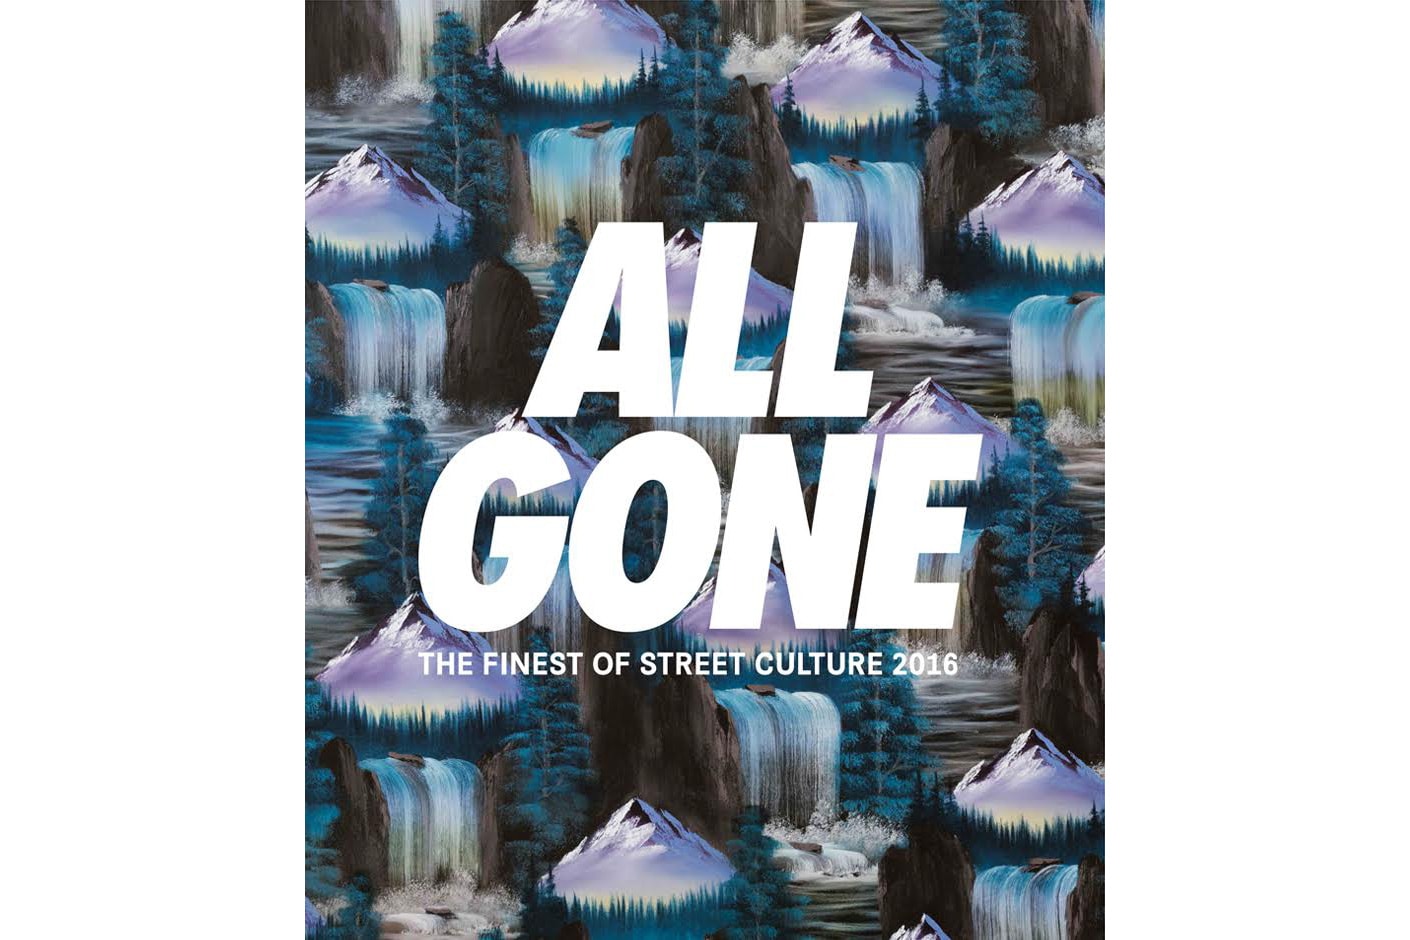 The new issue of ALL GONE will publish in the end of January